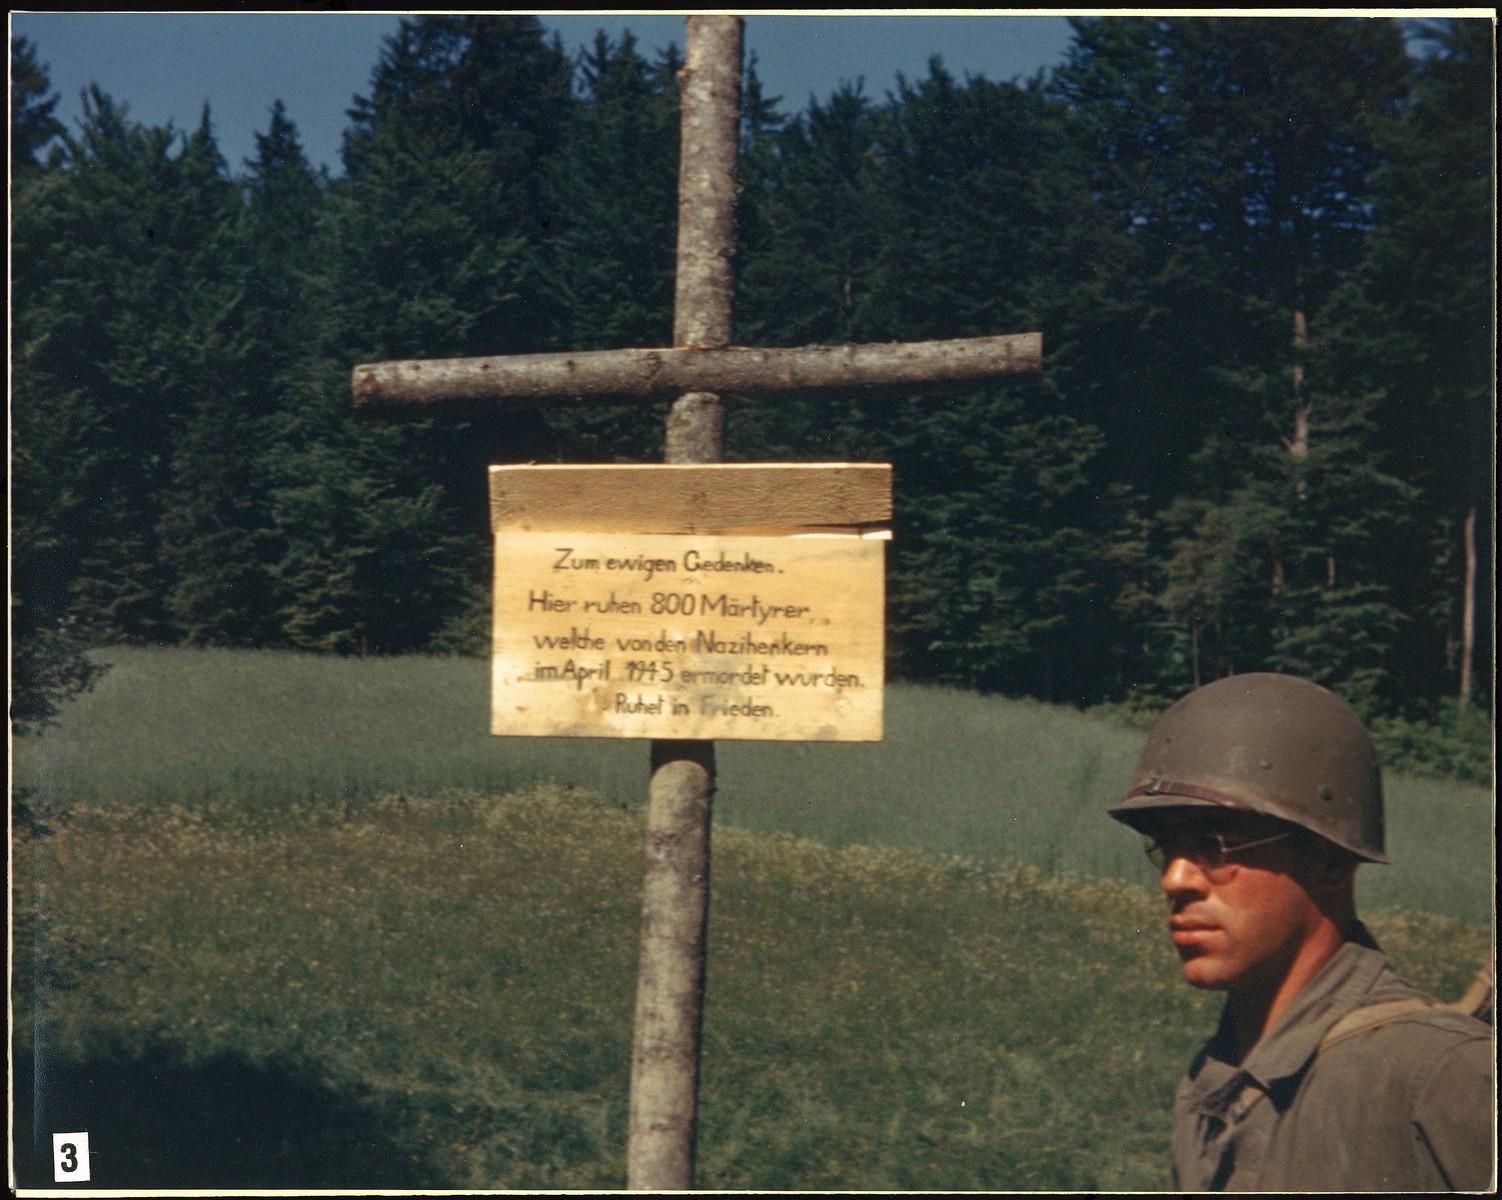 An American soldier stands next to a sign erected by the U.S. Army to mark the site of the Nammering atrocity.  It reads: "In eternal memory.  Here lie 800 martyrs who were murdered by Nazi executioners in April 1945.  Rest in peace."